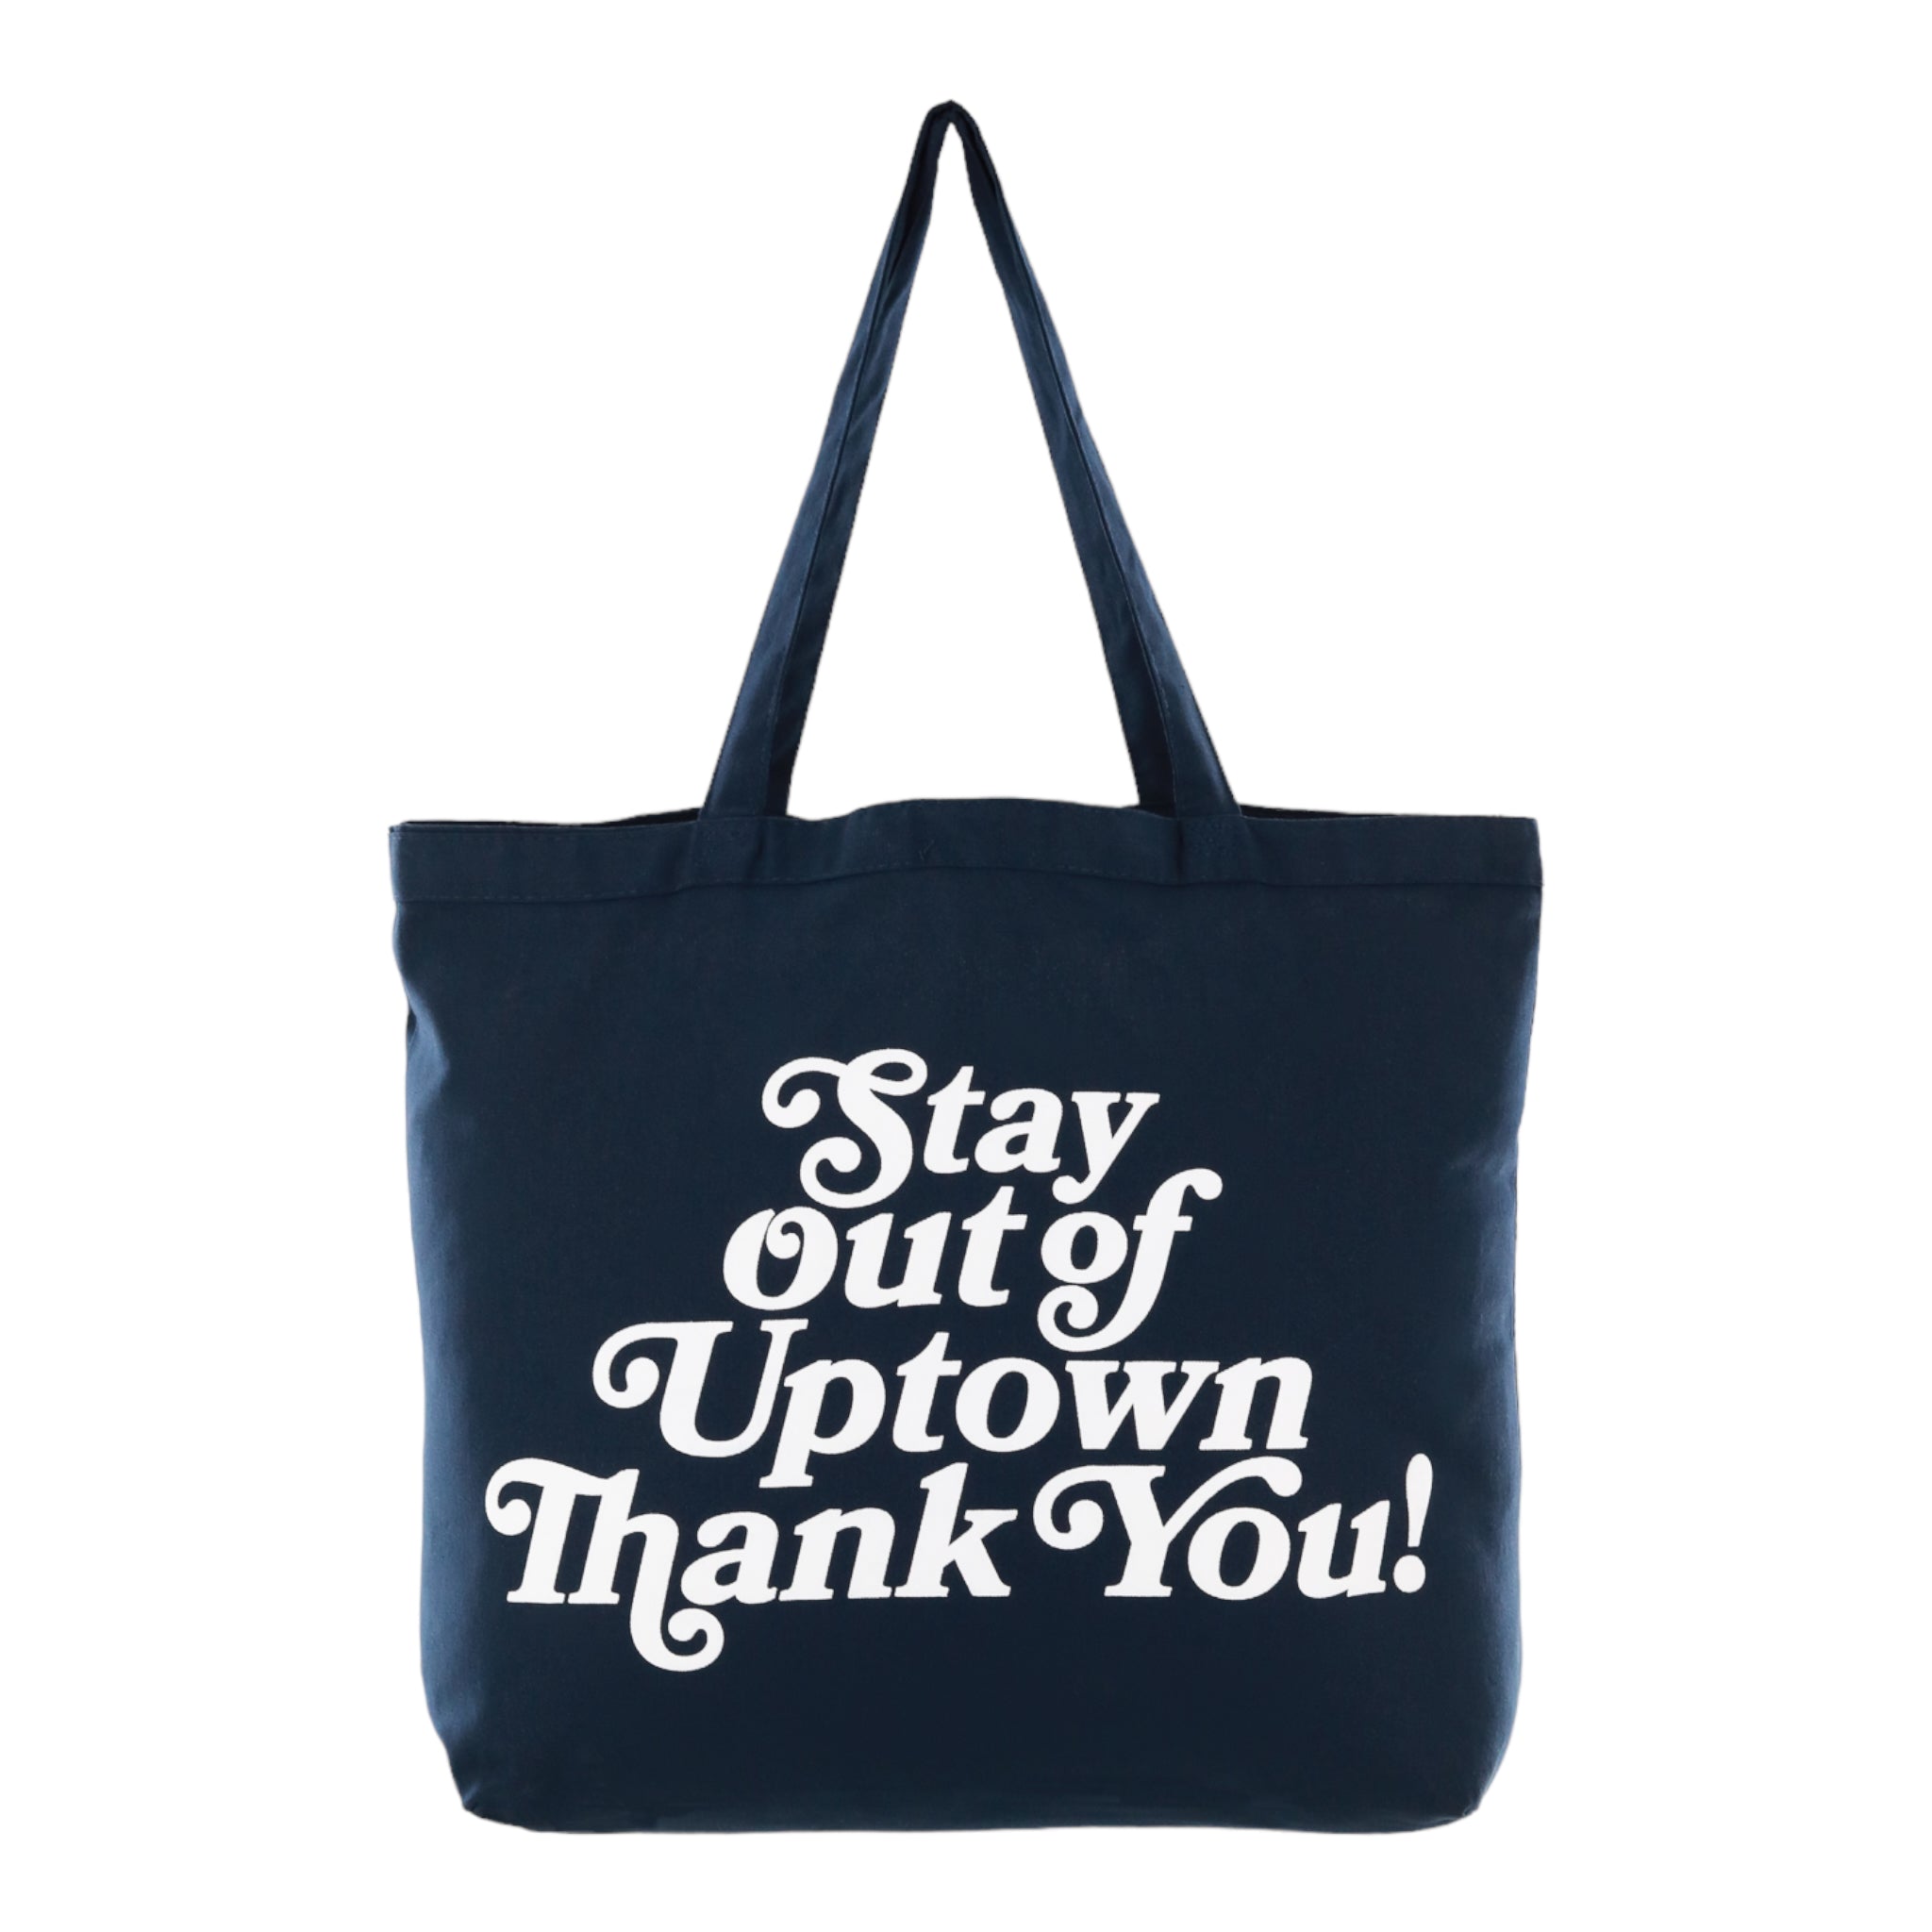 Stay Out of Uptown - Navy Canvas Tote Bag